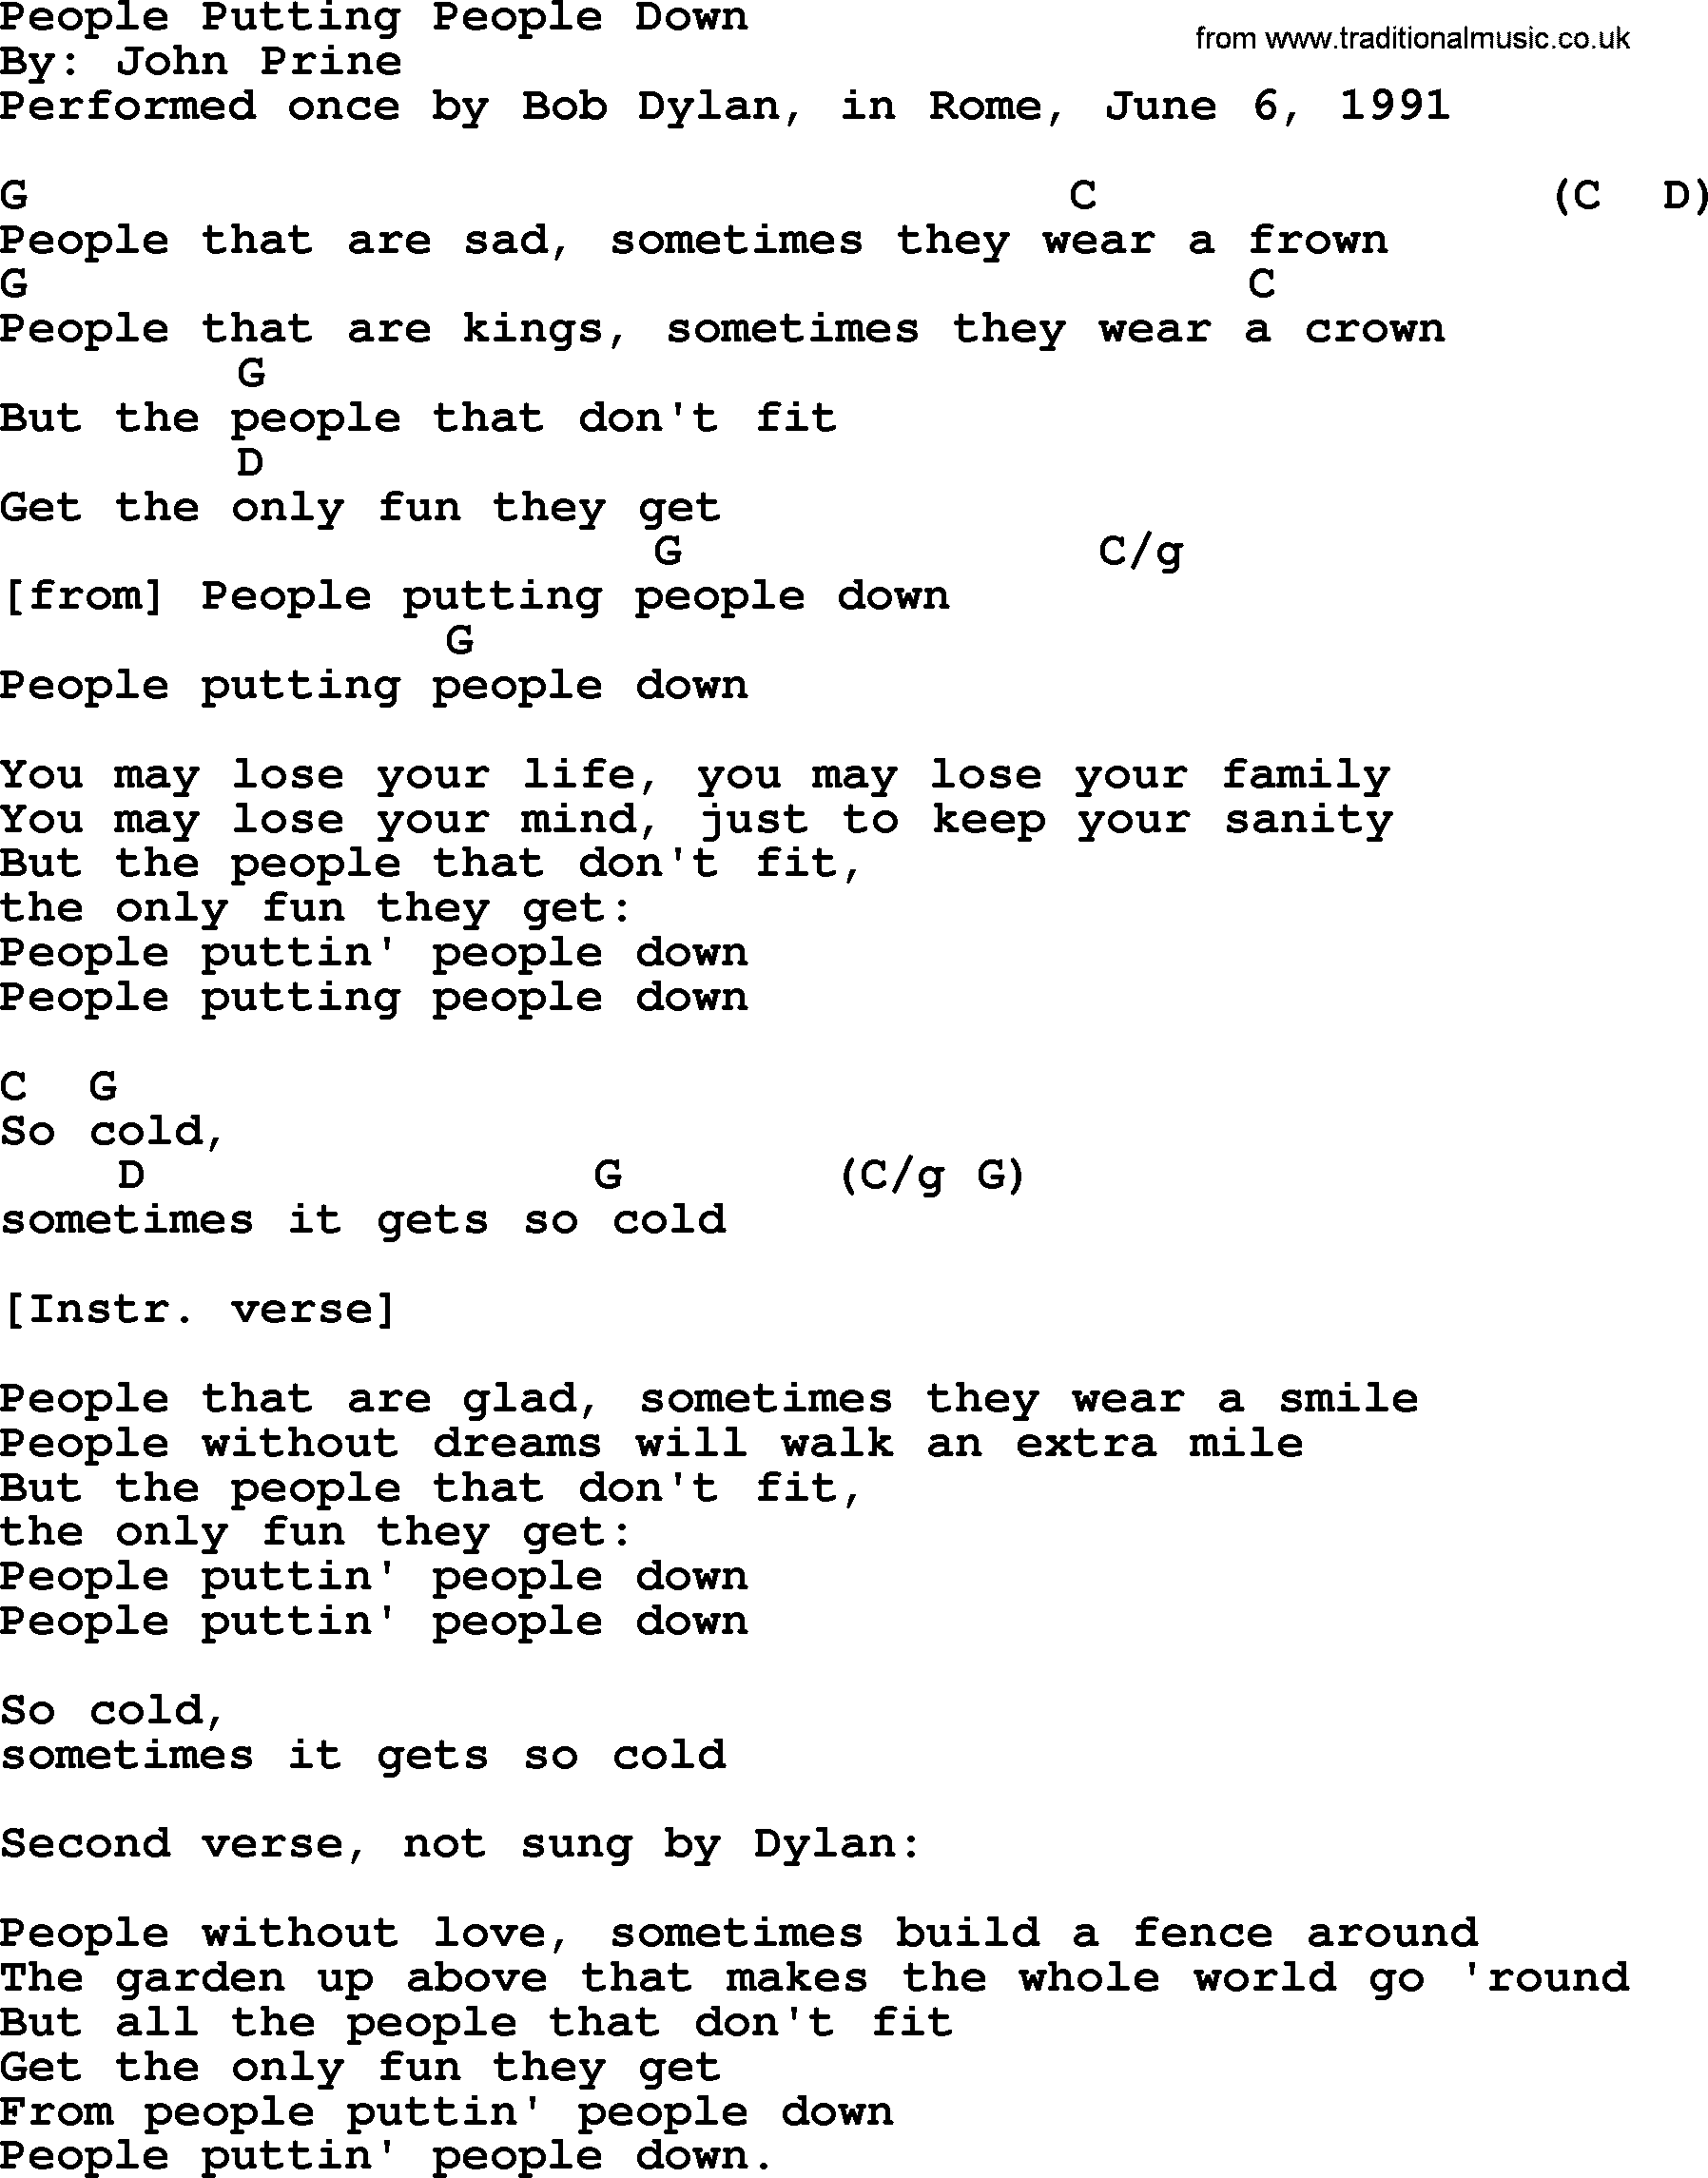 Bob Dylan song, lyrics with chords - People Putting People Down